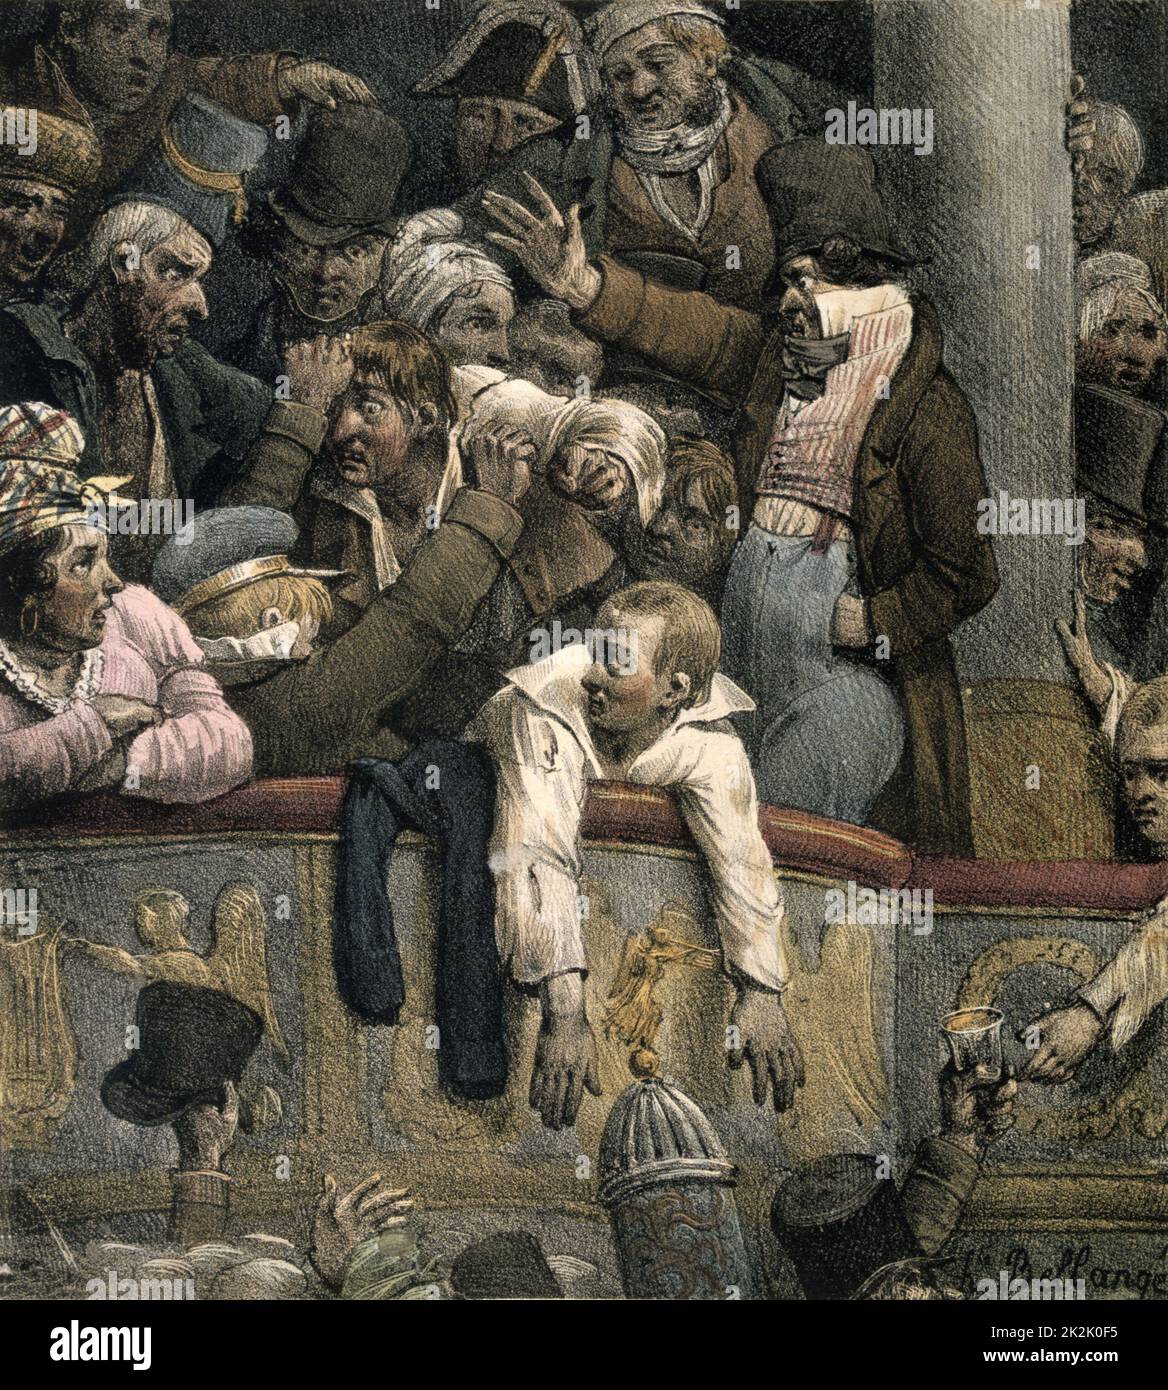 'Box at the Theatre' by Hippolyte Bellange (1800-1866) French painter. Chaotic scene with overcrowded Box with audience fighting . Bottom left a top hat is being handed back. Bottom right a drink is being handed up from the promenade level. Stock Photo